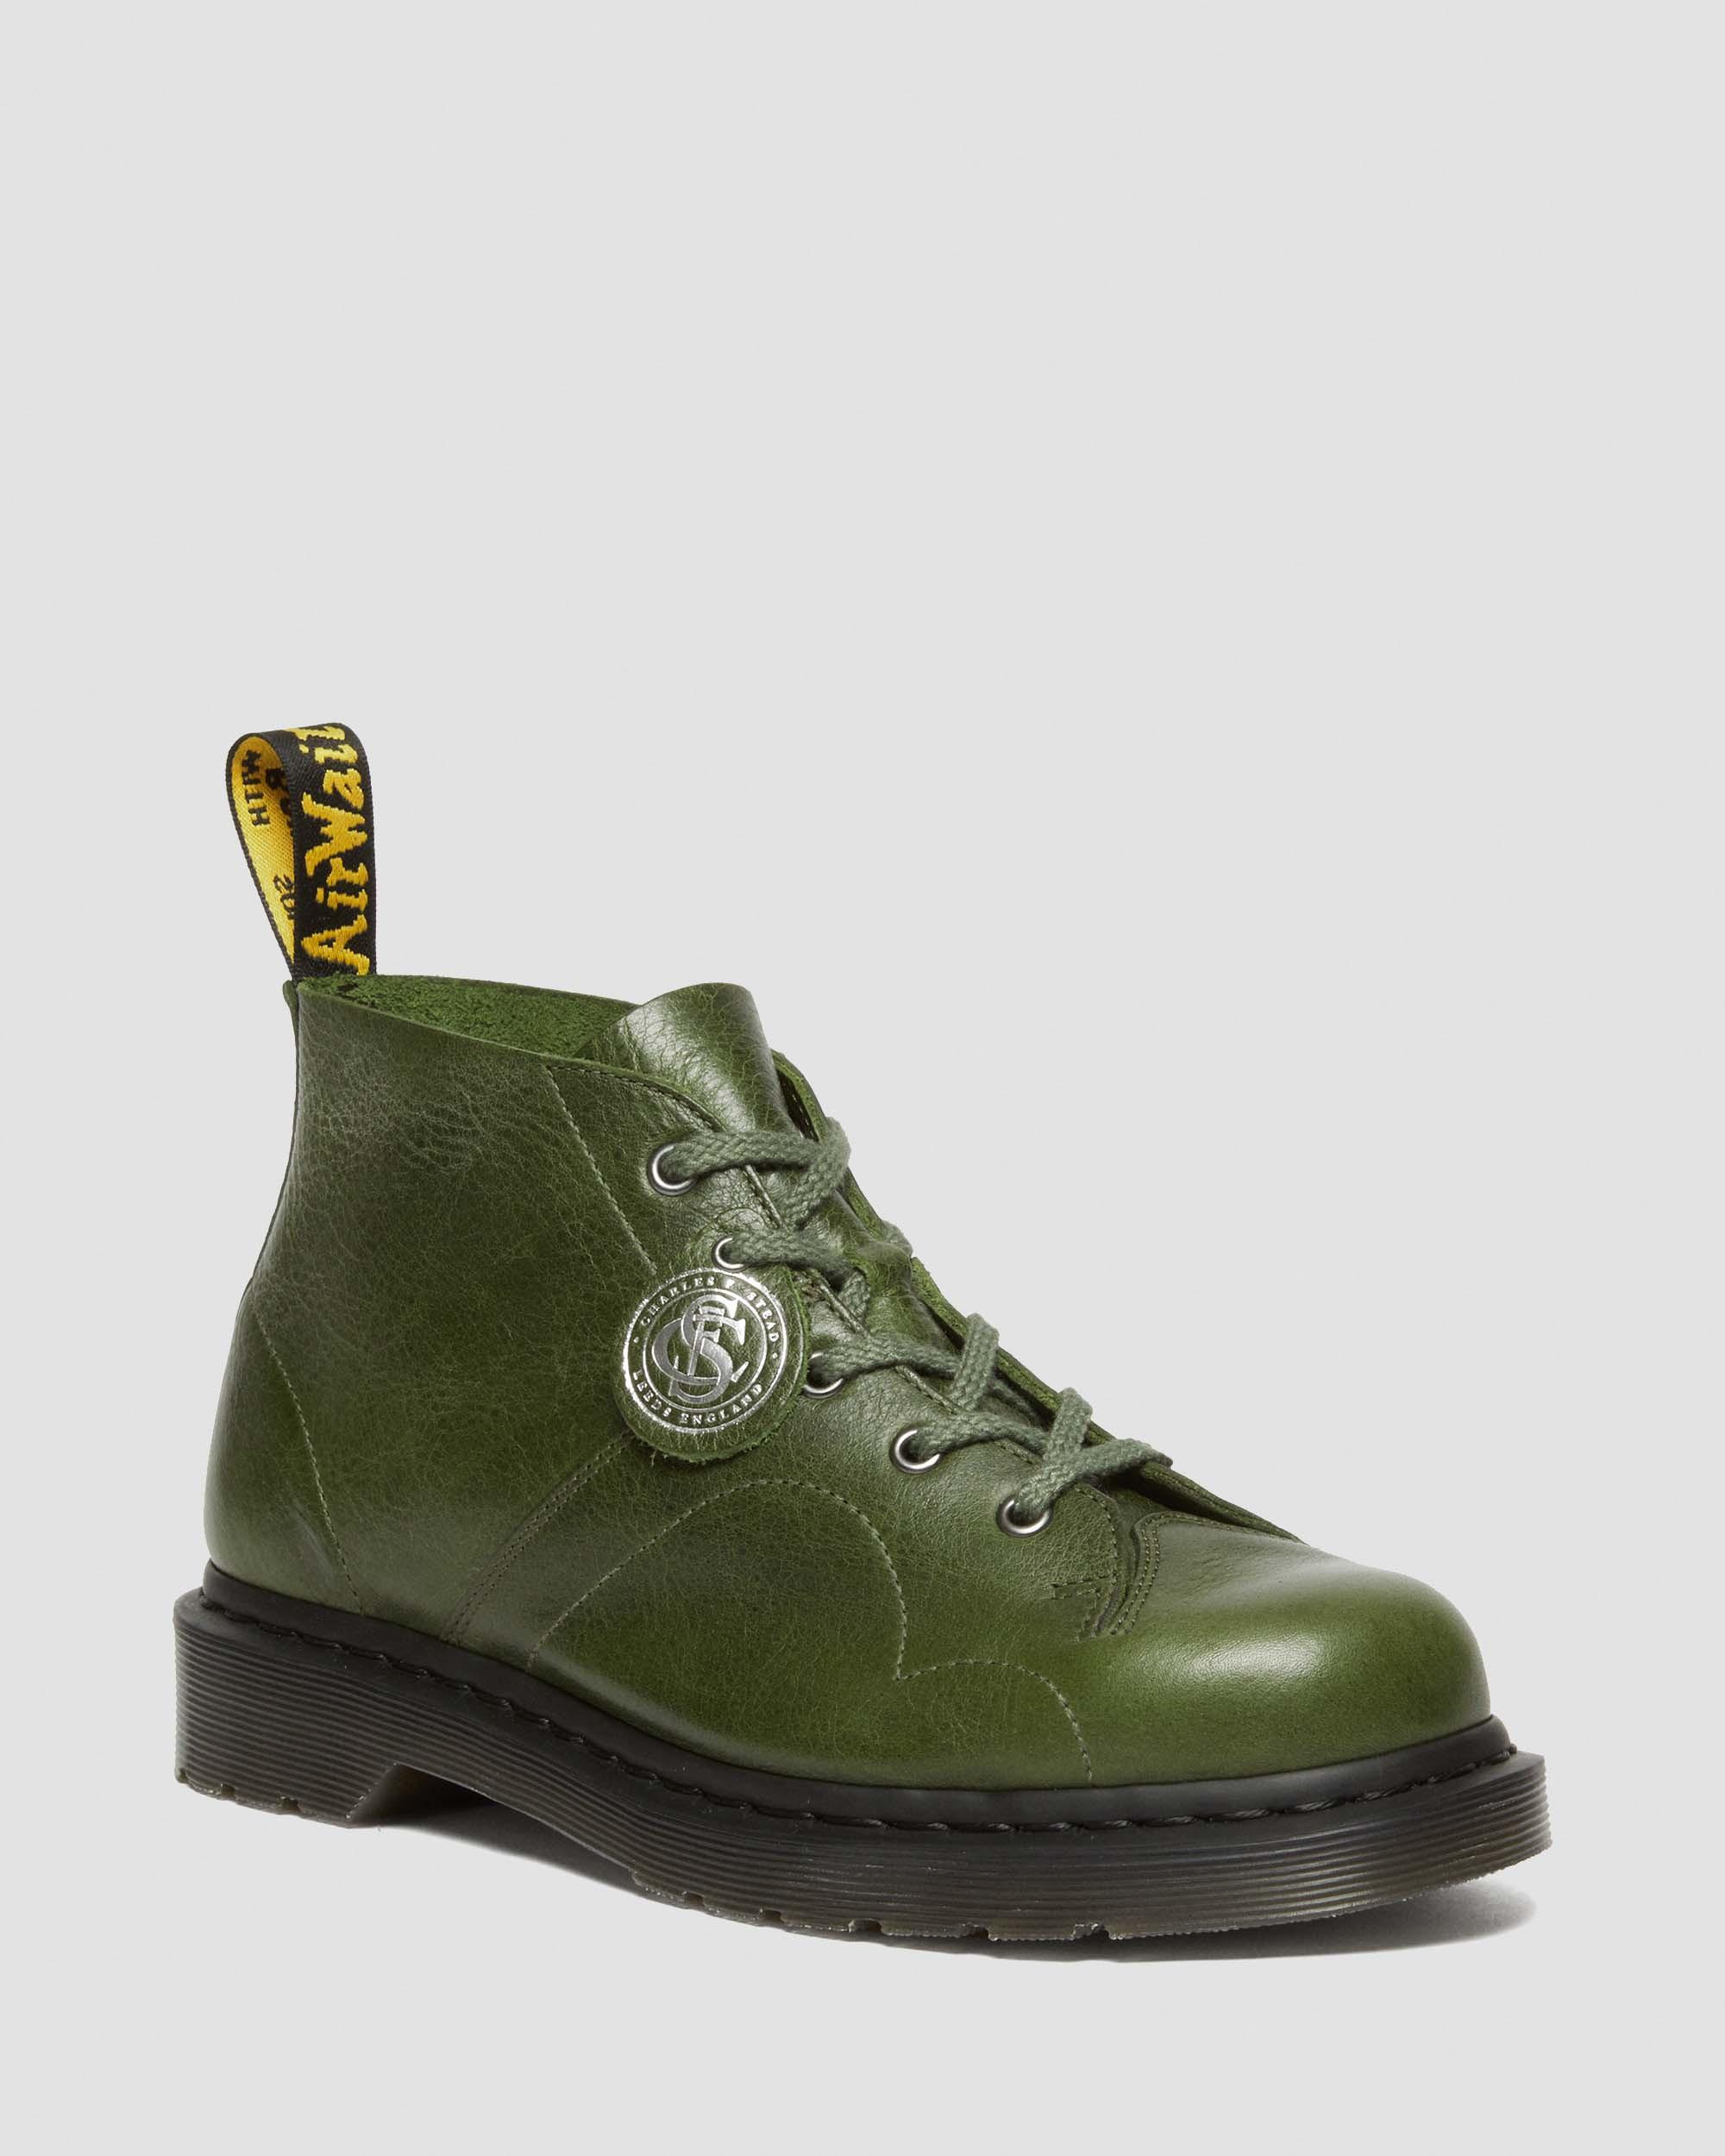 Church Vintage Smooth Leather Monkey Boots in Black | Dr. Martens